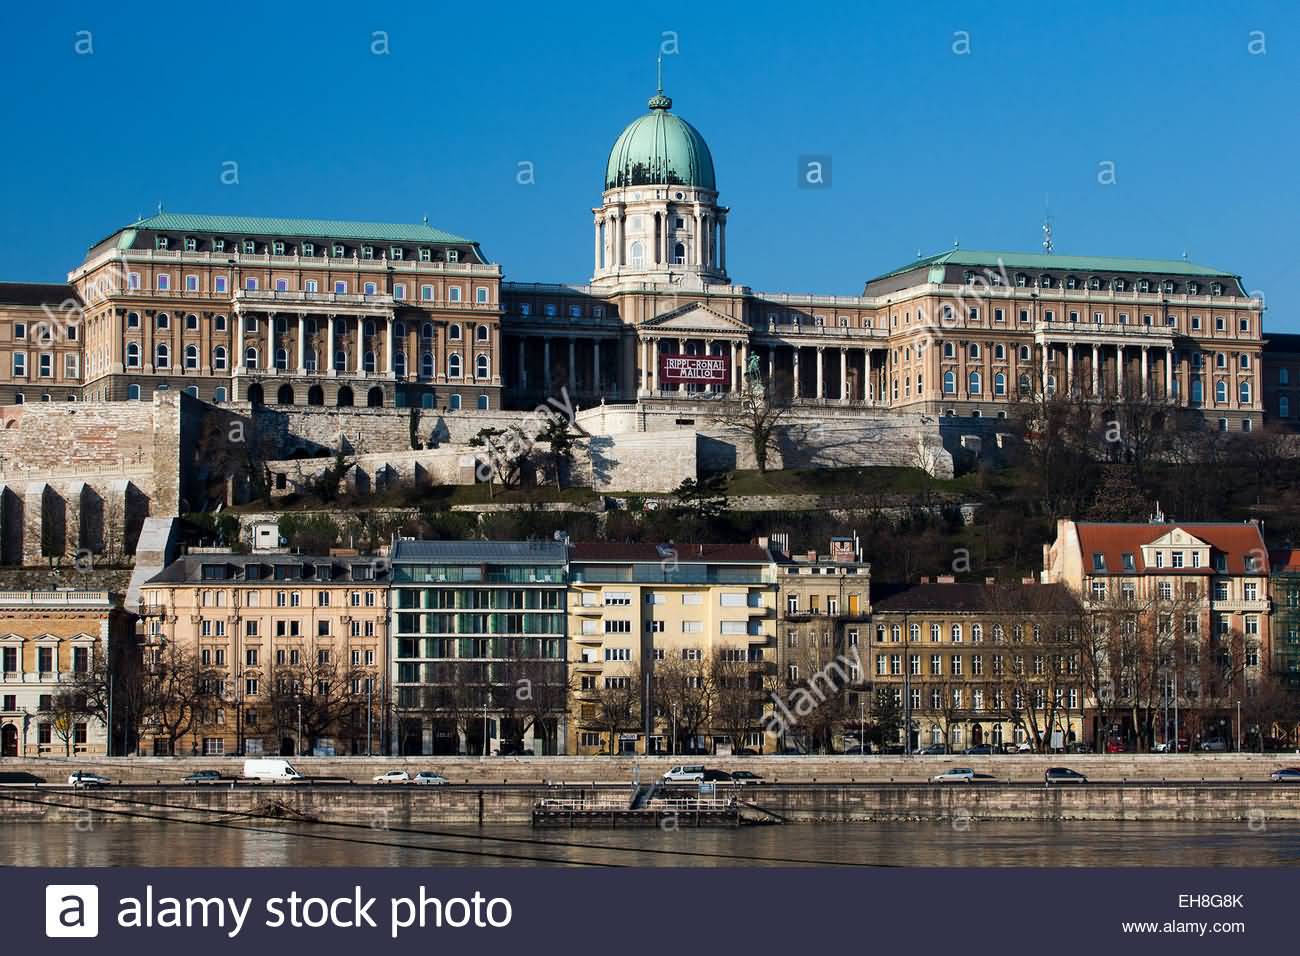 The Buda Castle In Budapest, Hungary